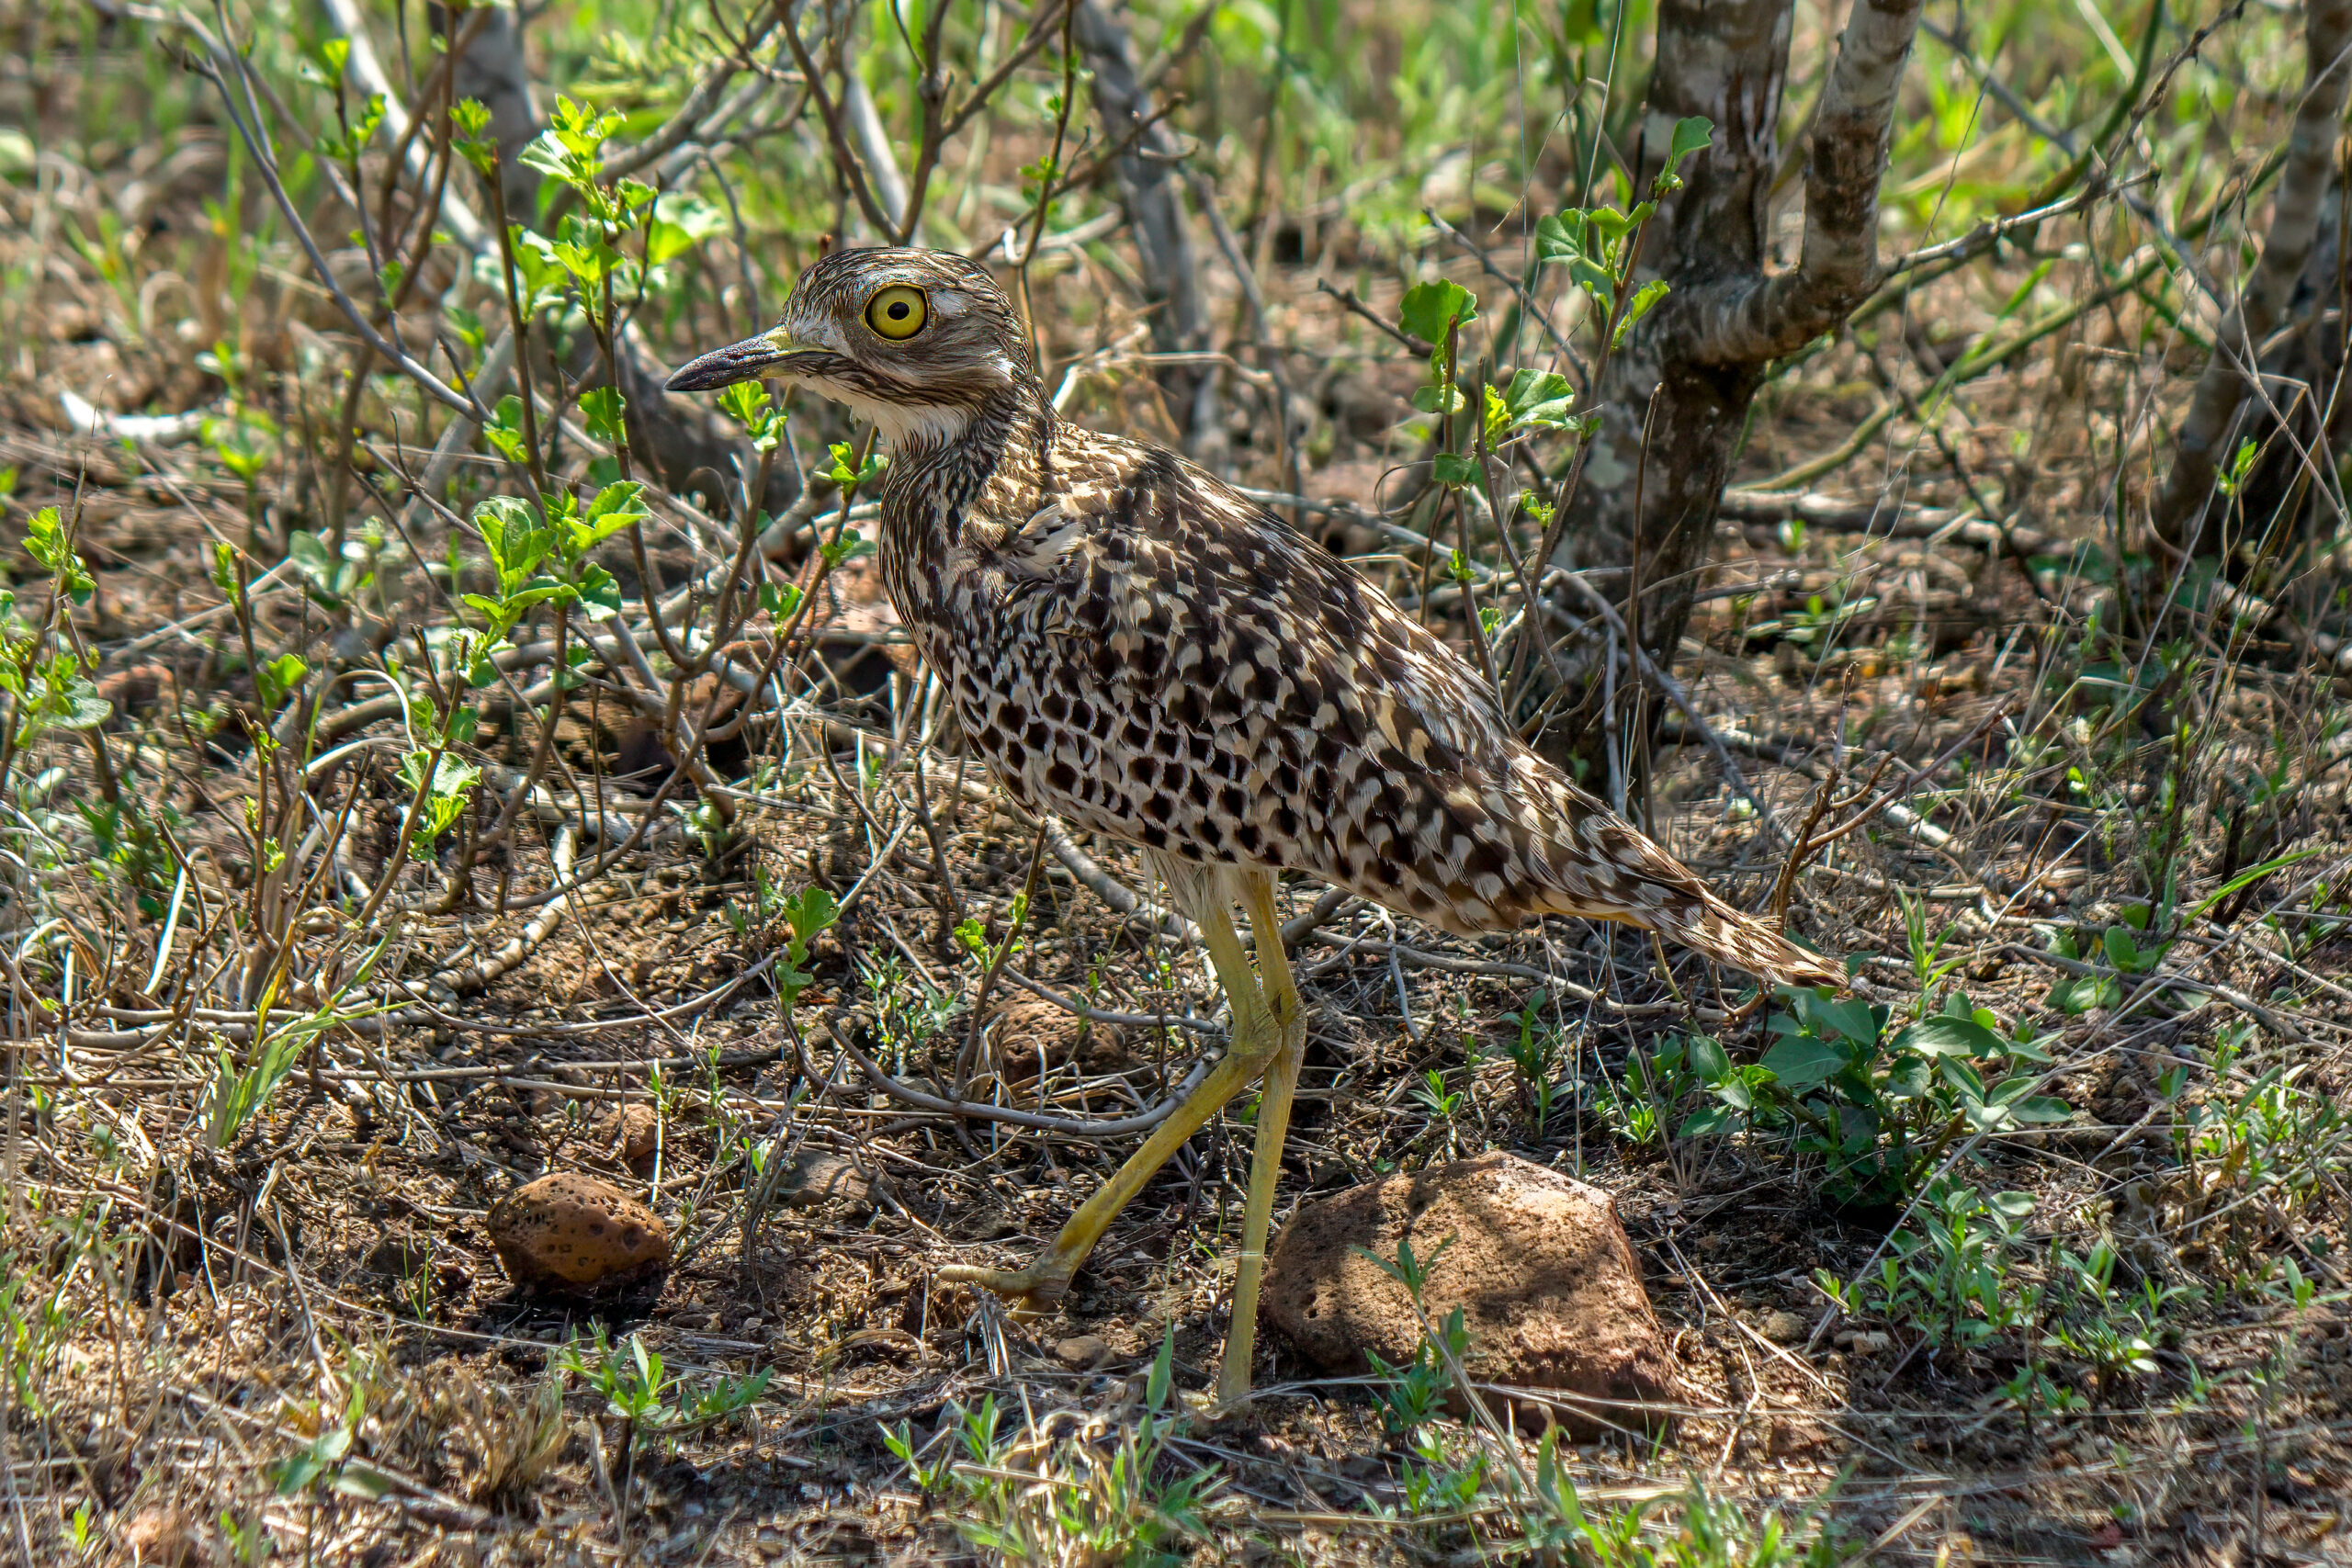 Spotted Thick-knee (Burhinus capensis) @ Ndumo Game Reserve, South Africa. Photo: Håvard Rosenlund